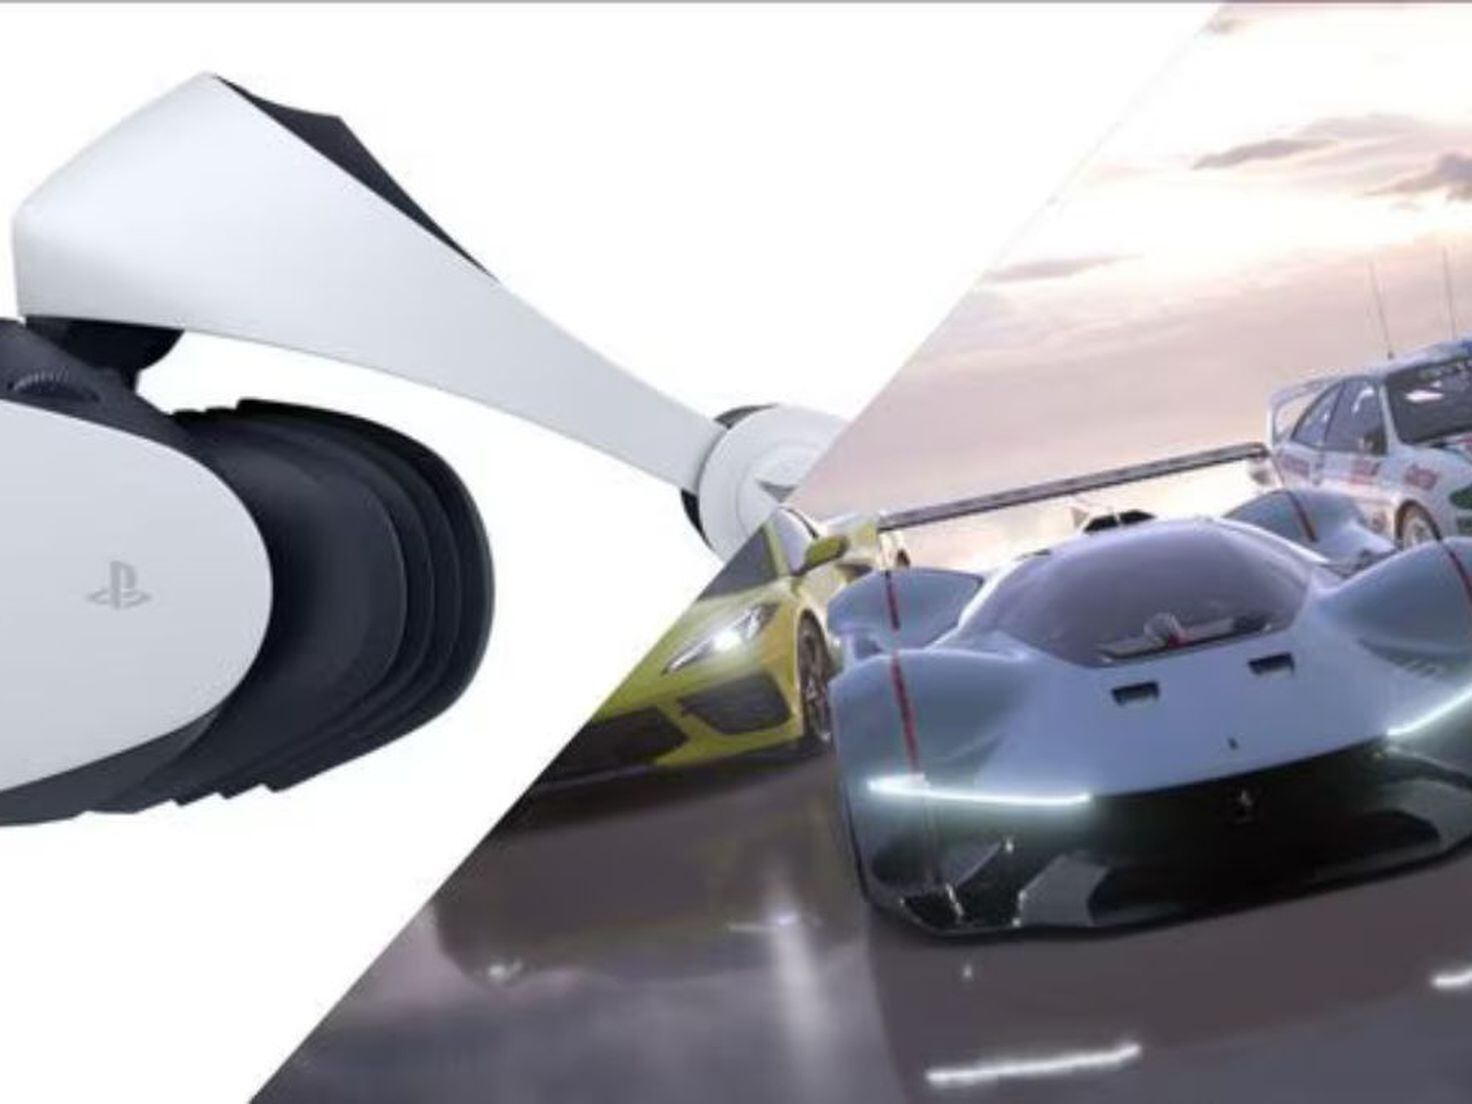 Gran Turismo 7 PS5 Upgrade & Pre-Order Details Announced By Sony